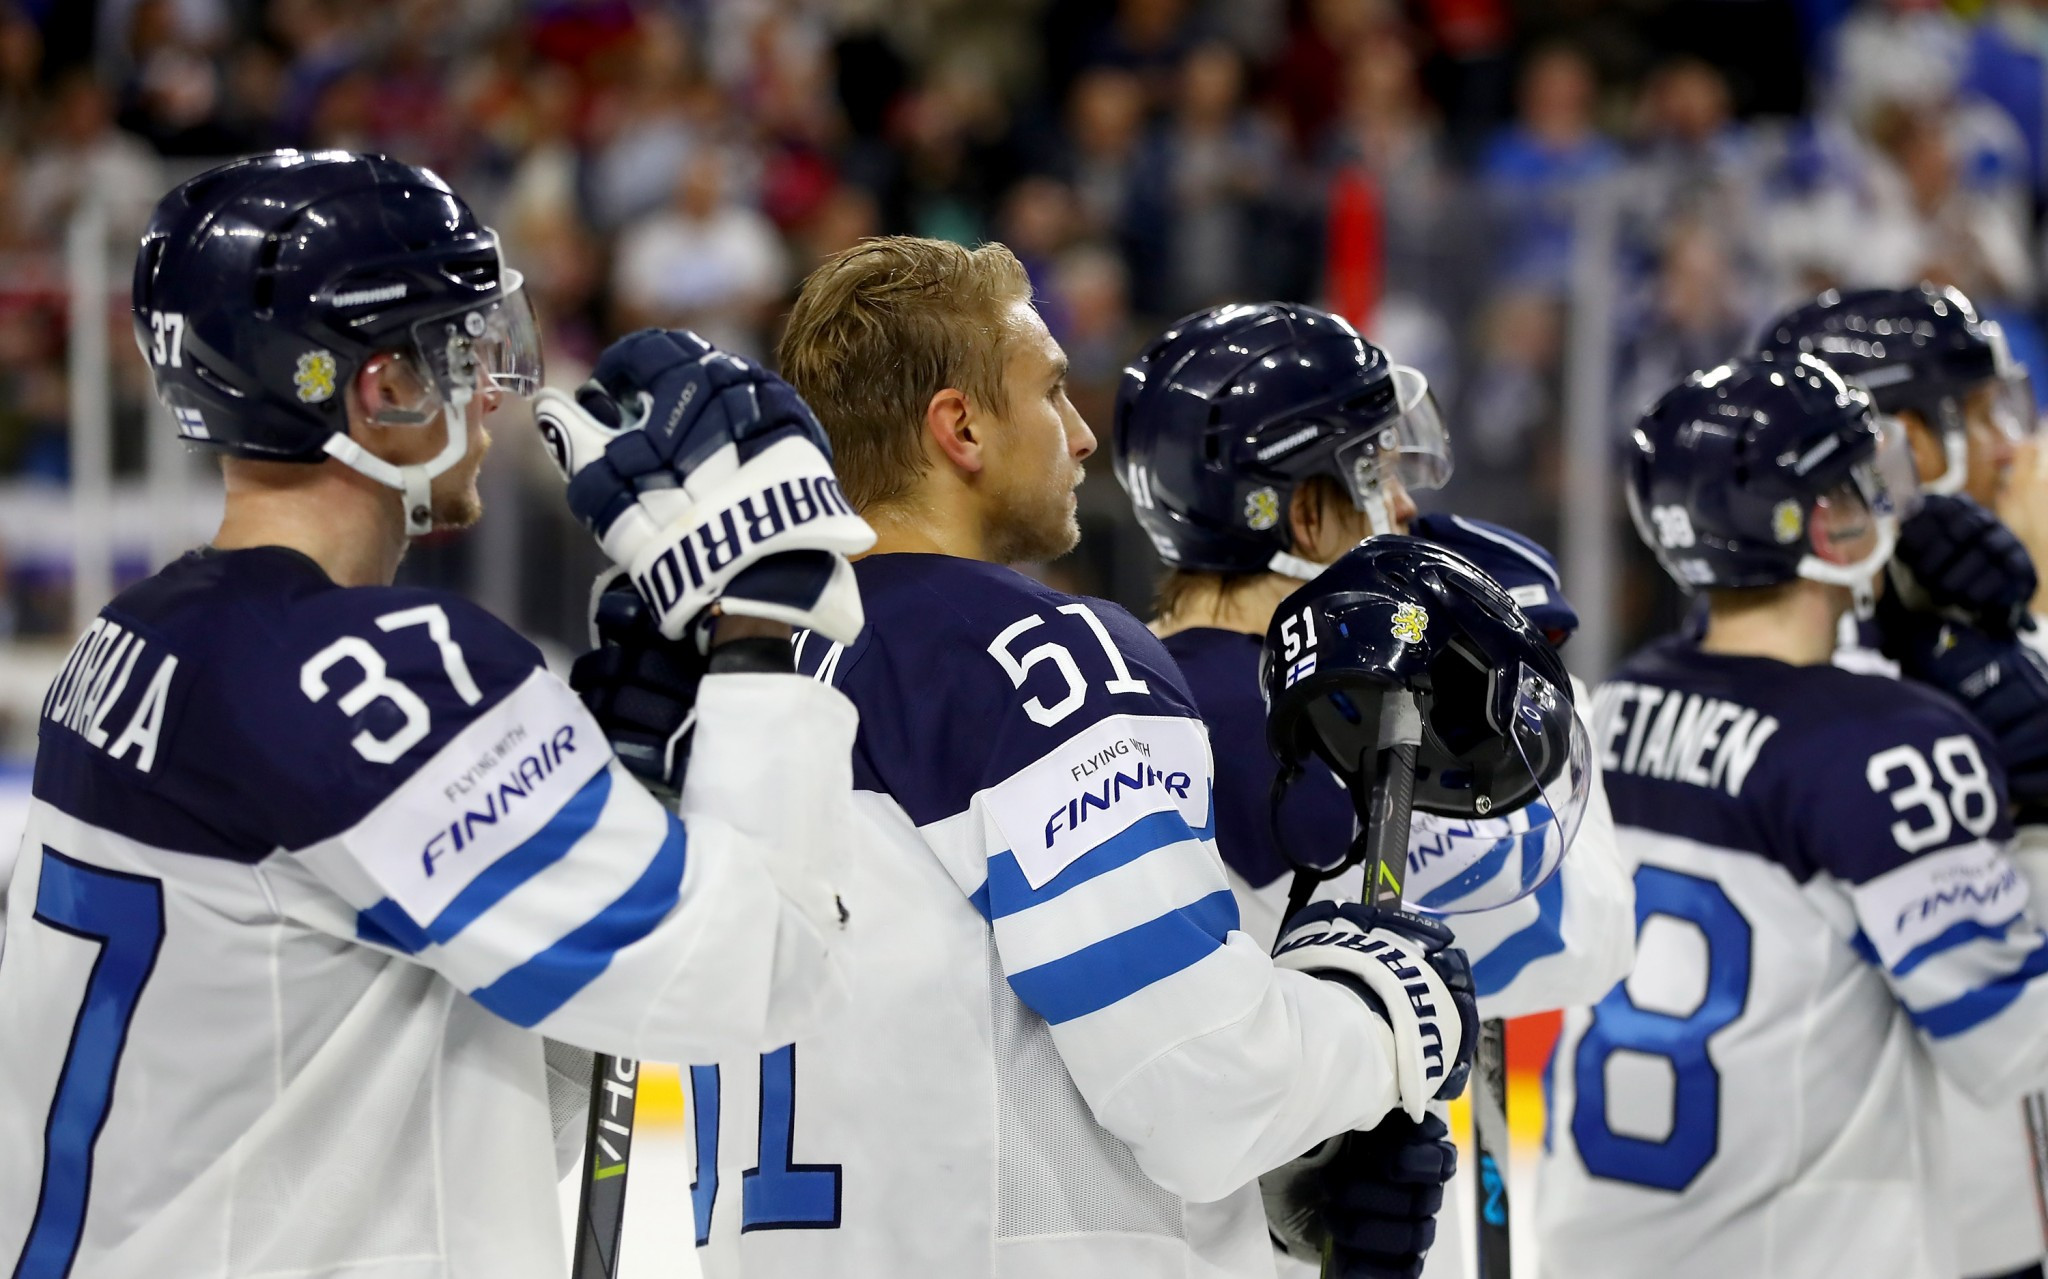 Finland finished fourth at this year's World Championships ©Getty Images